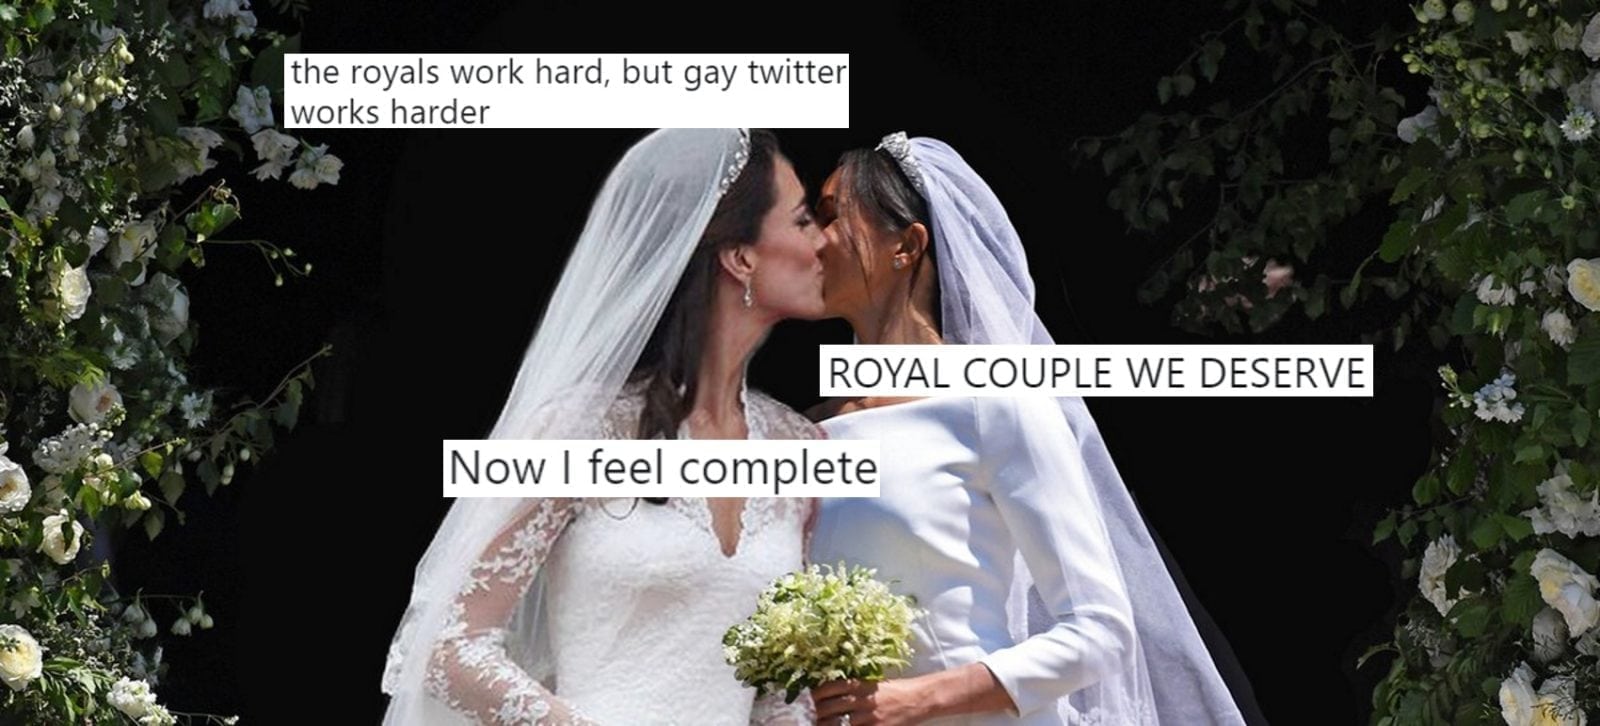 This Photoshop Of Meghan Markle And Kate Middleton Getting Married Has Gone Viral Page 2 Of 2